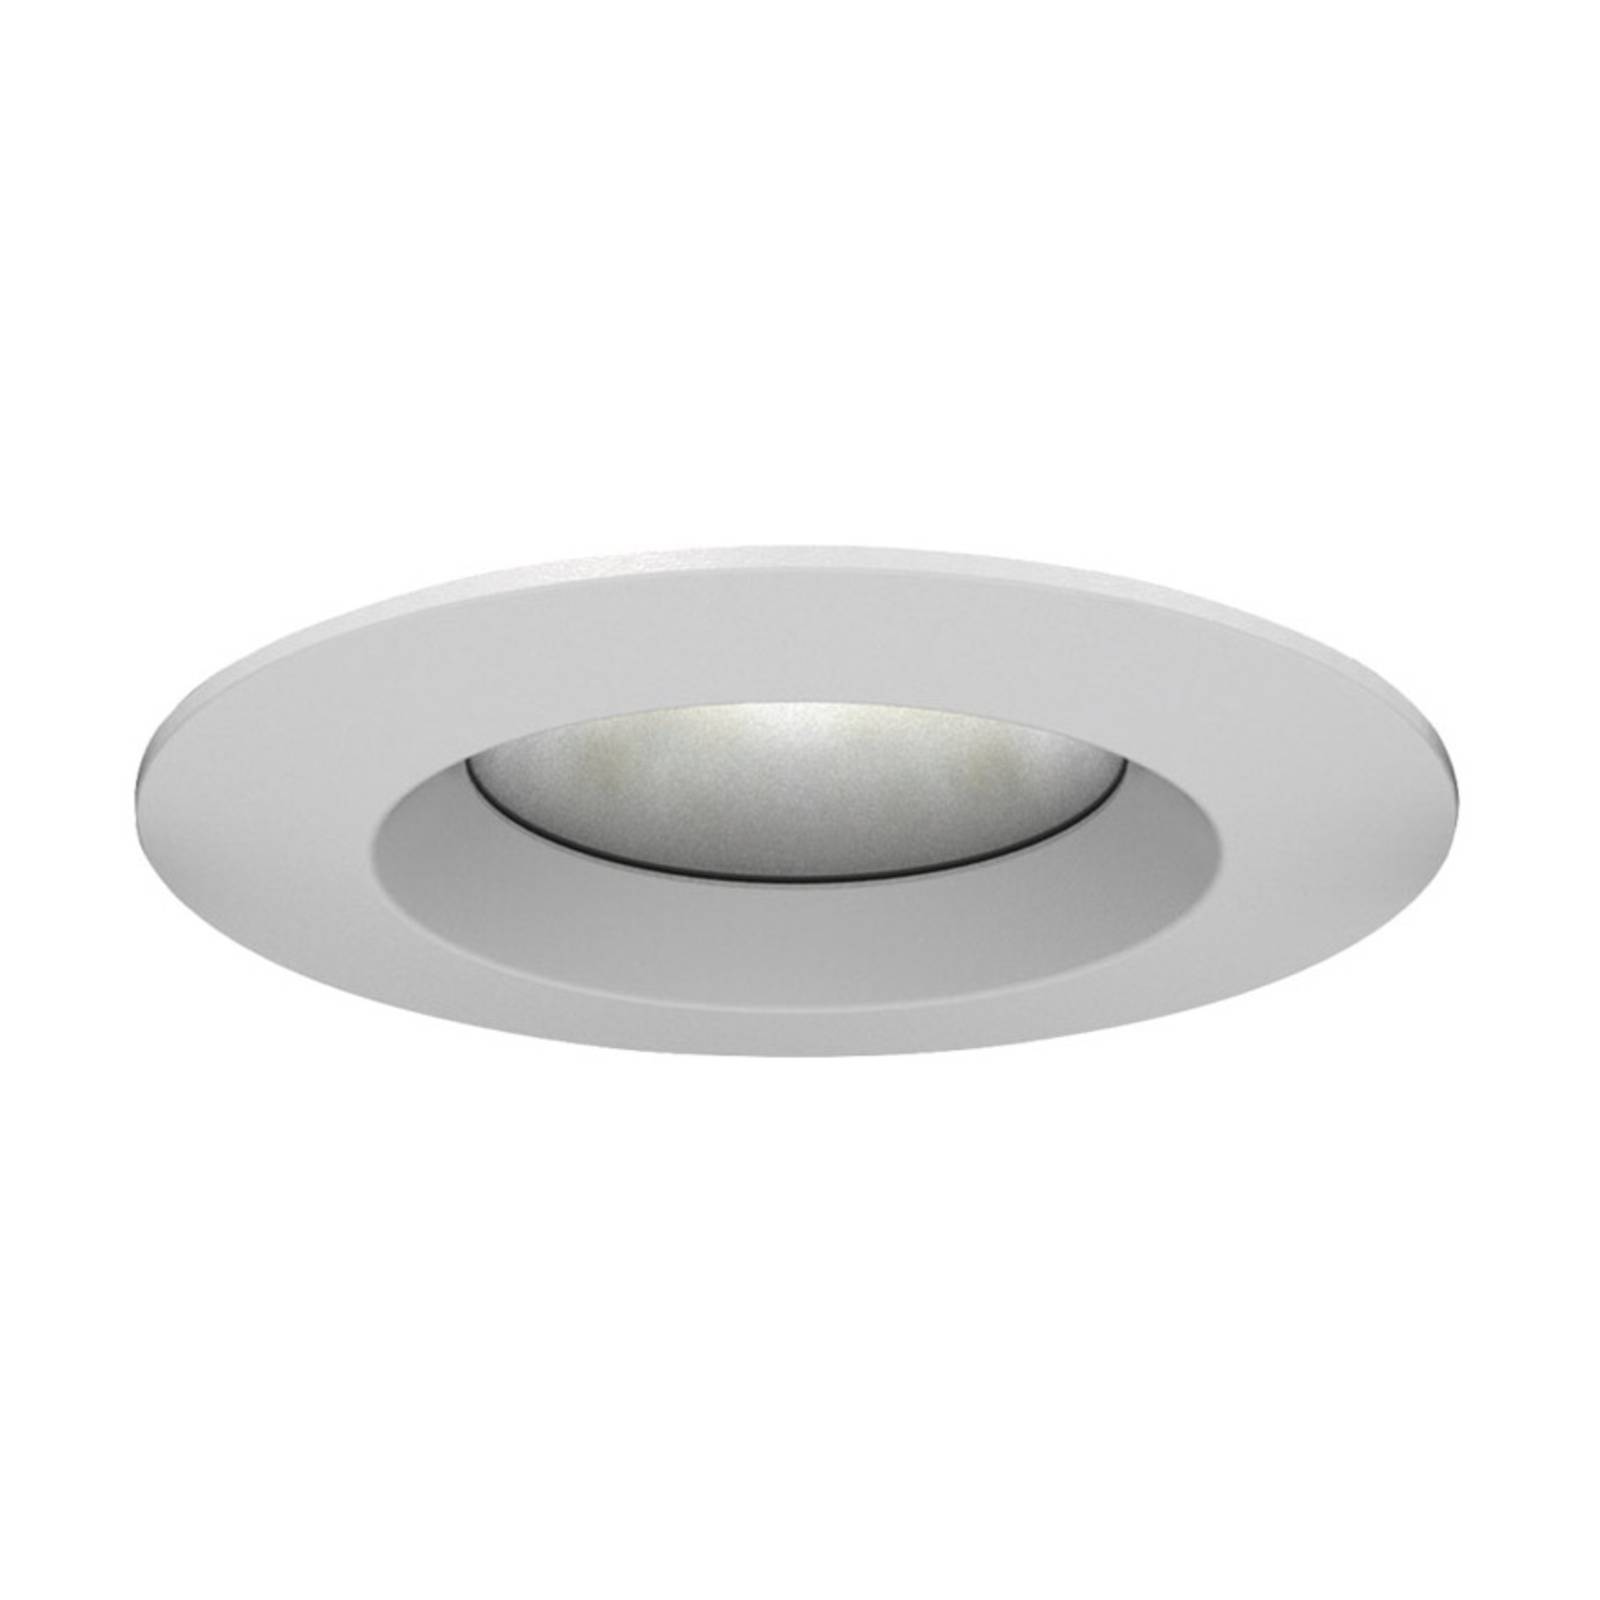 Siteco Lunis 40 IP65 downlight LED dimmable Ø38 cm